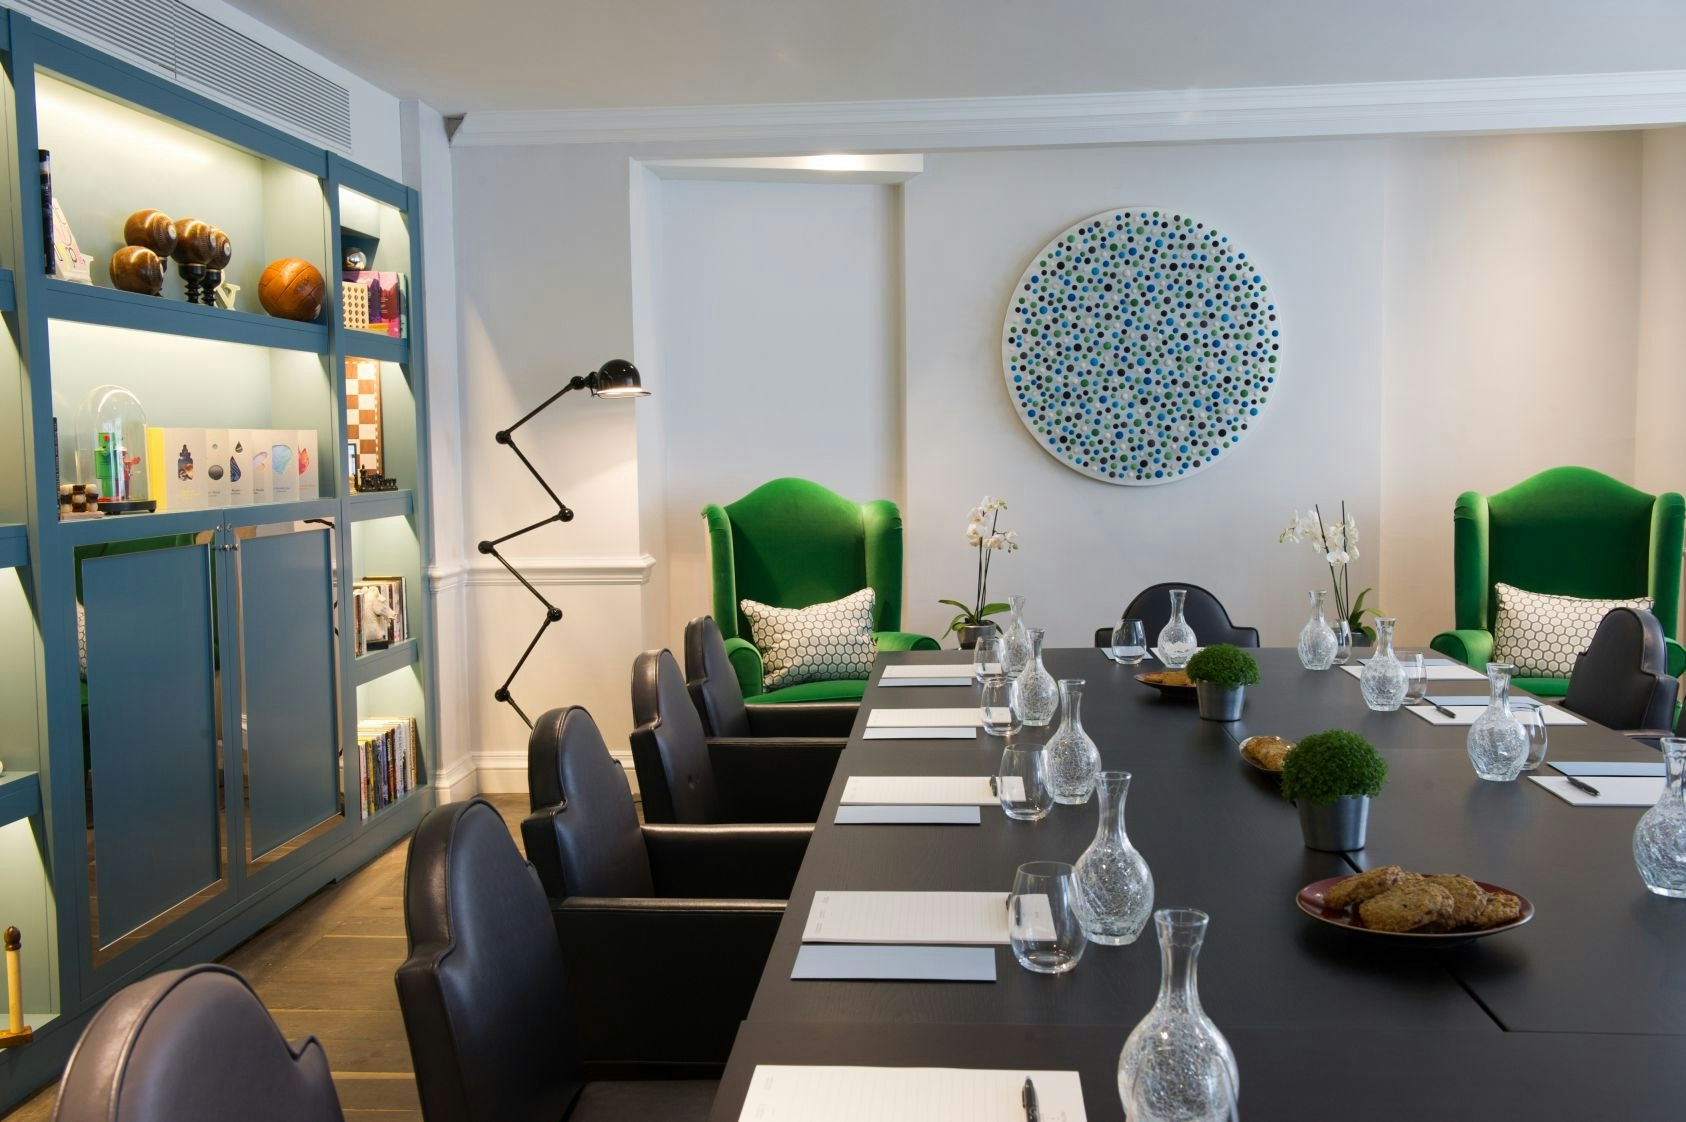 Seminar Rooms Venues in London - The Ampersand Hotel